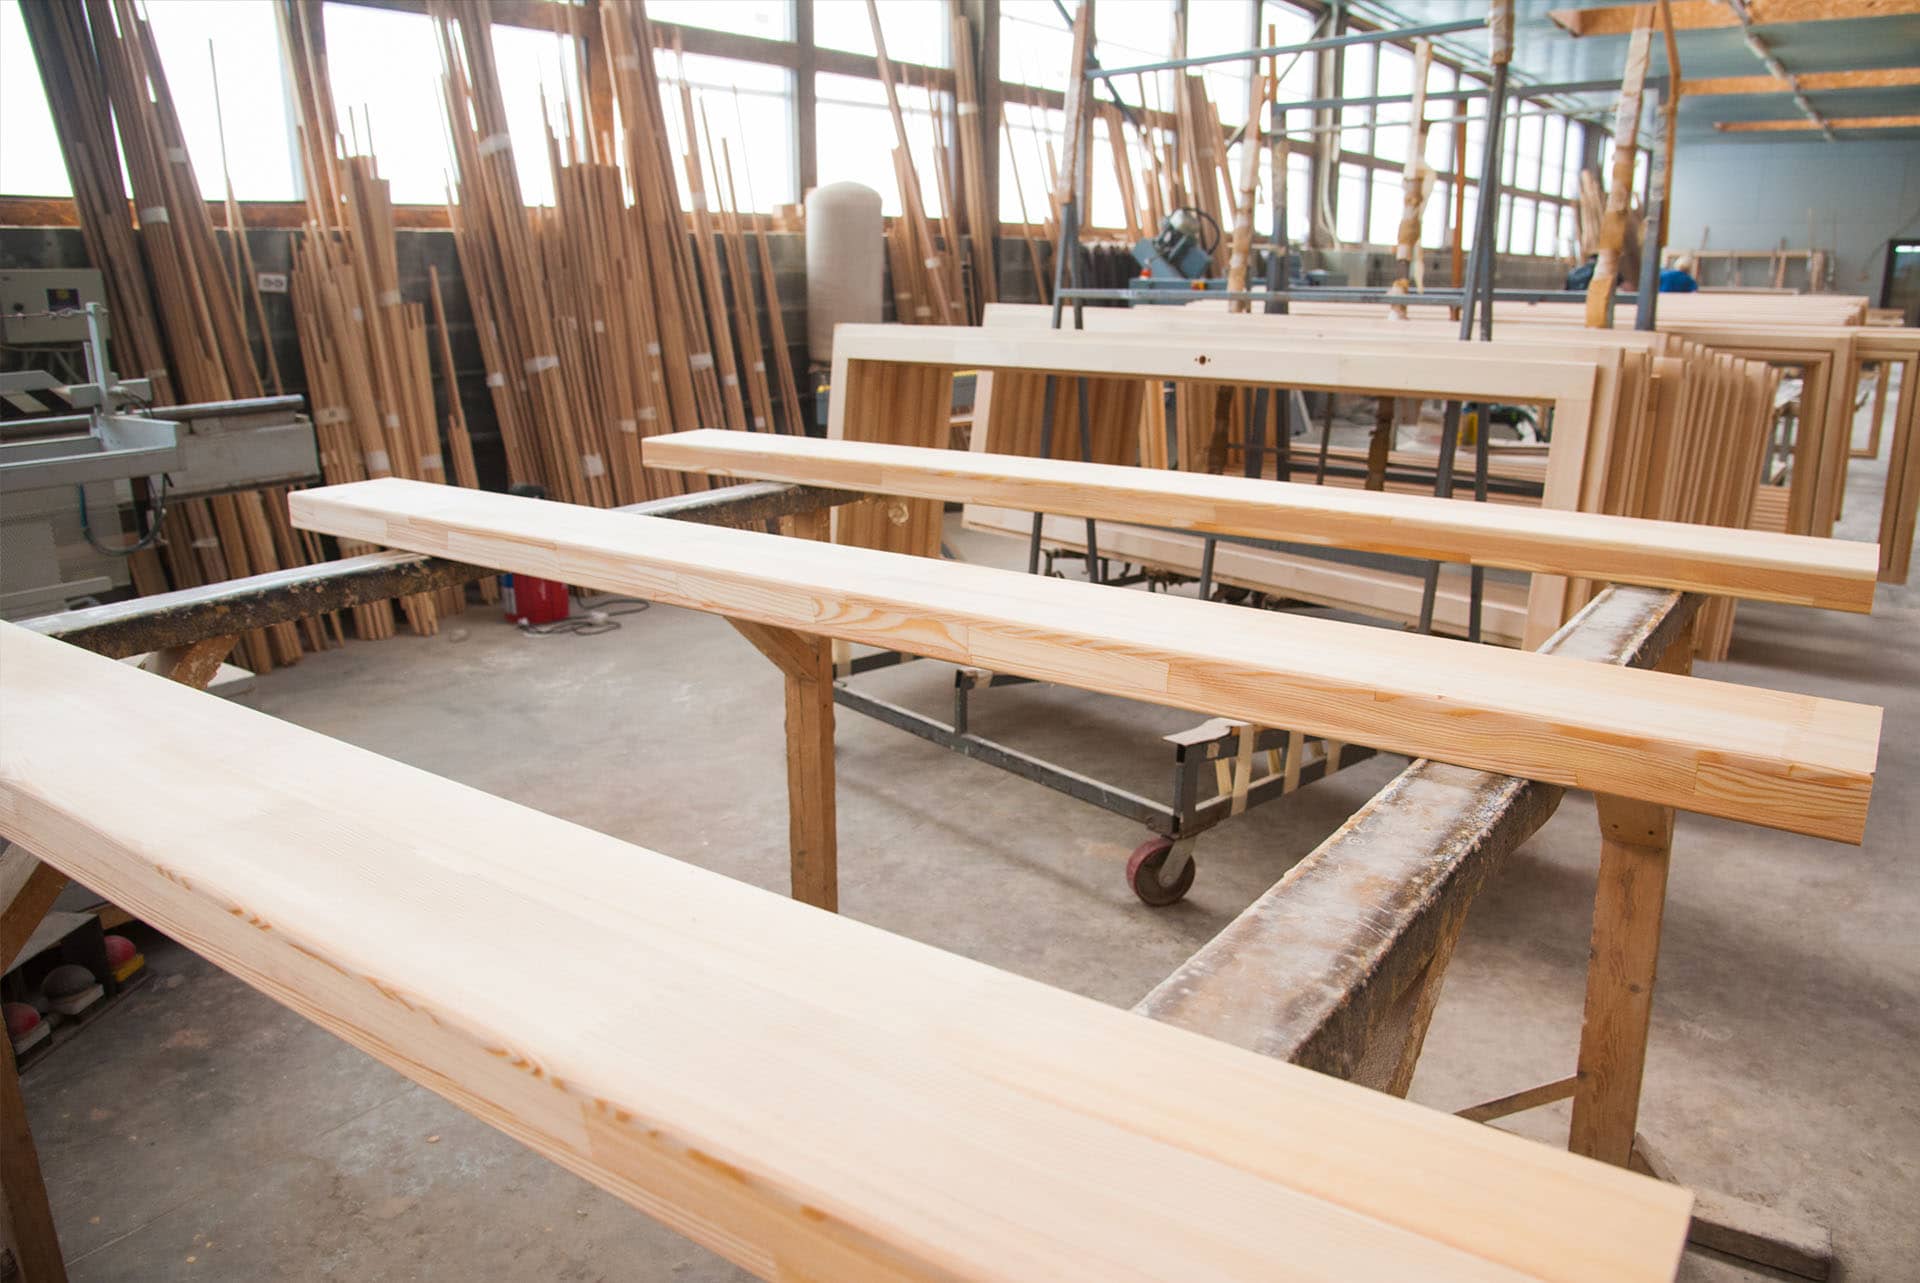 joinery-par-timber-sawn-planed-cut-to-size-workshop-planed-all-round